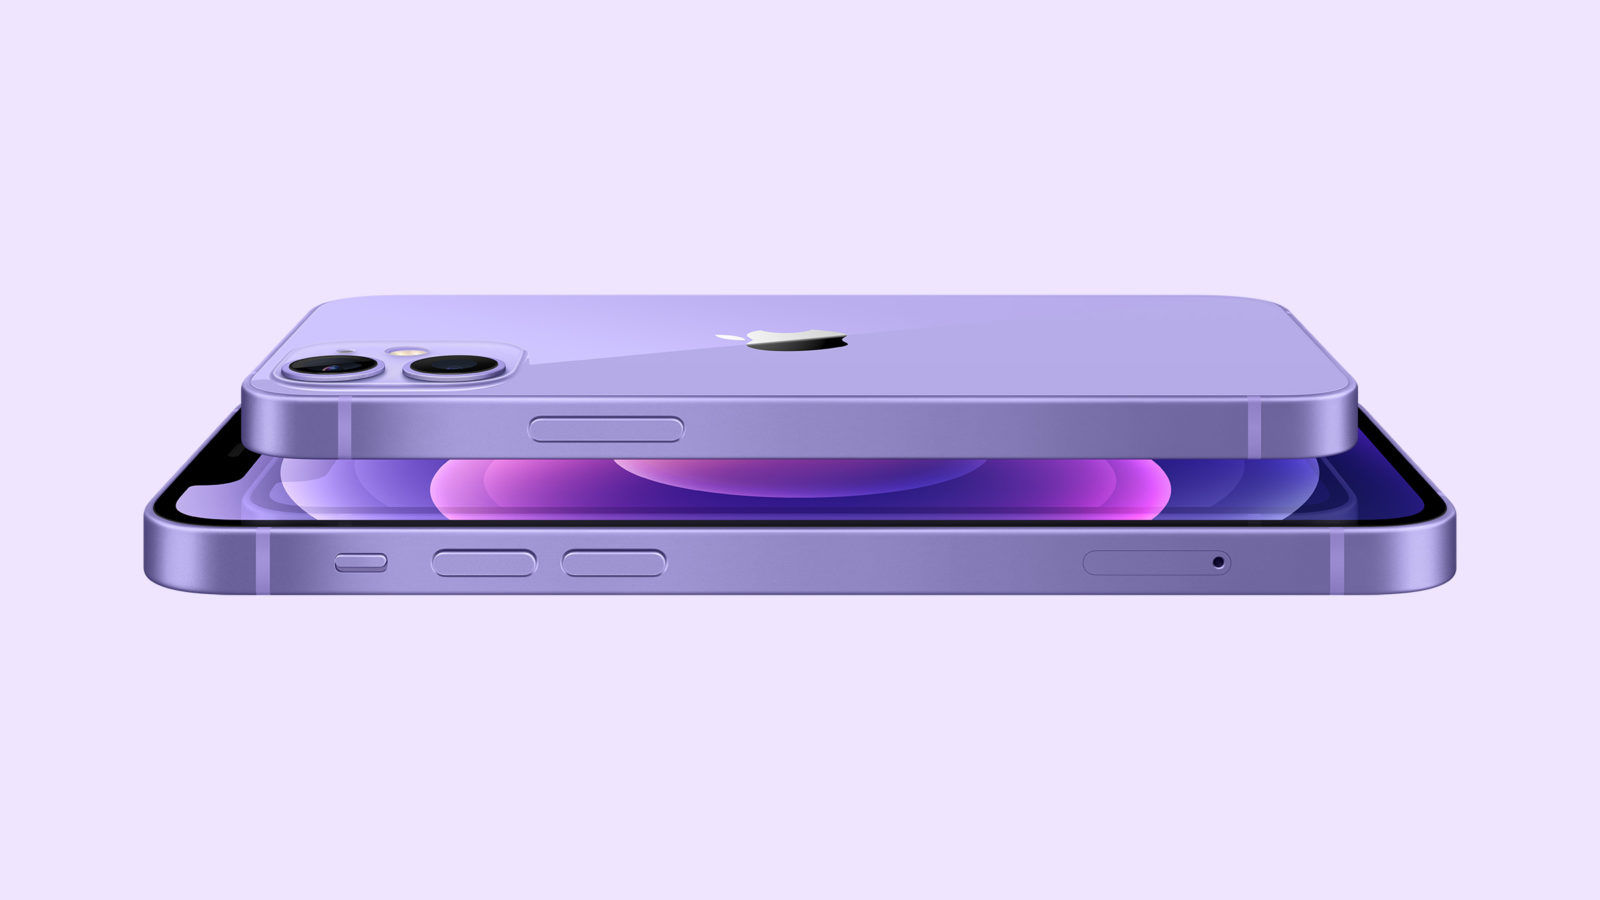 Purple iPhone 12s, the fastest iPad ever, and other Apple releases we can’t wait to get our hands on in 2021